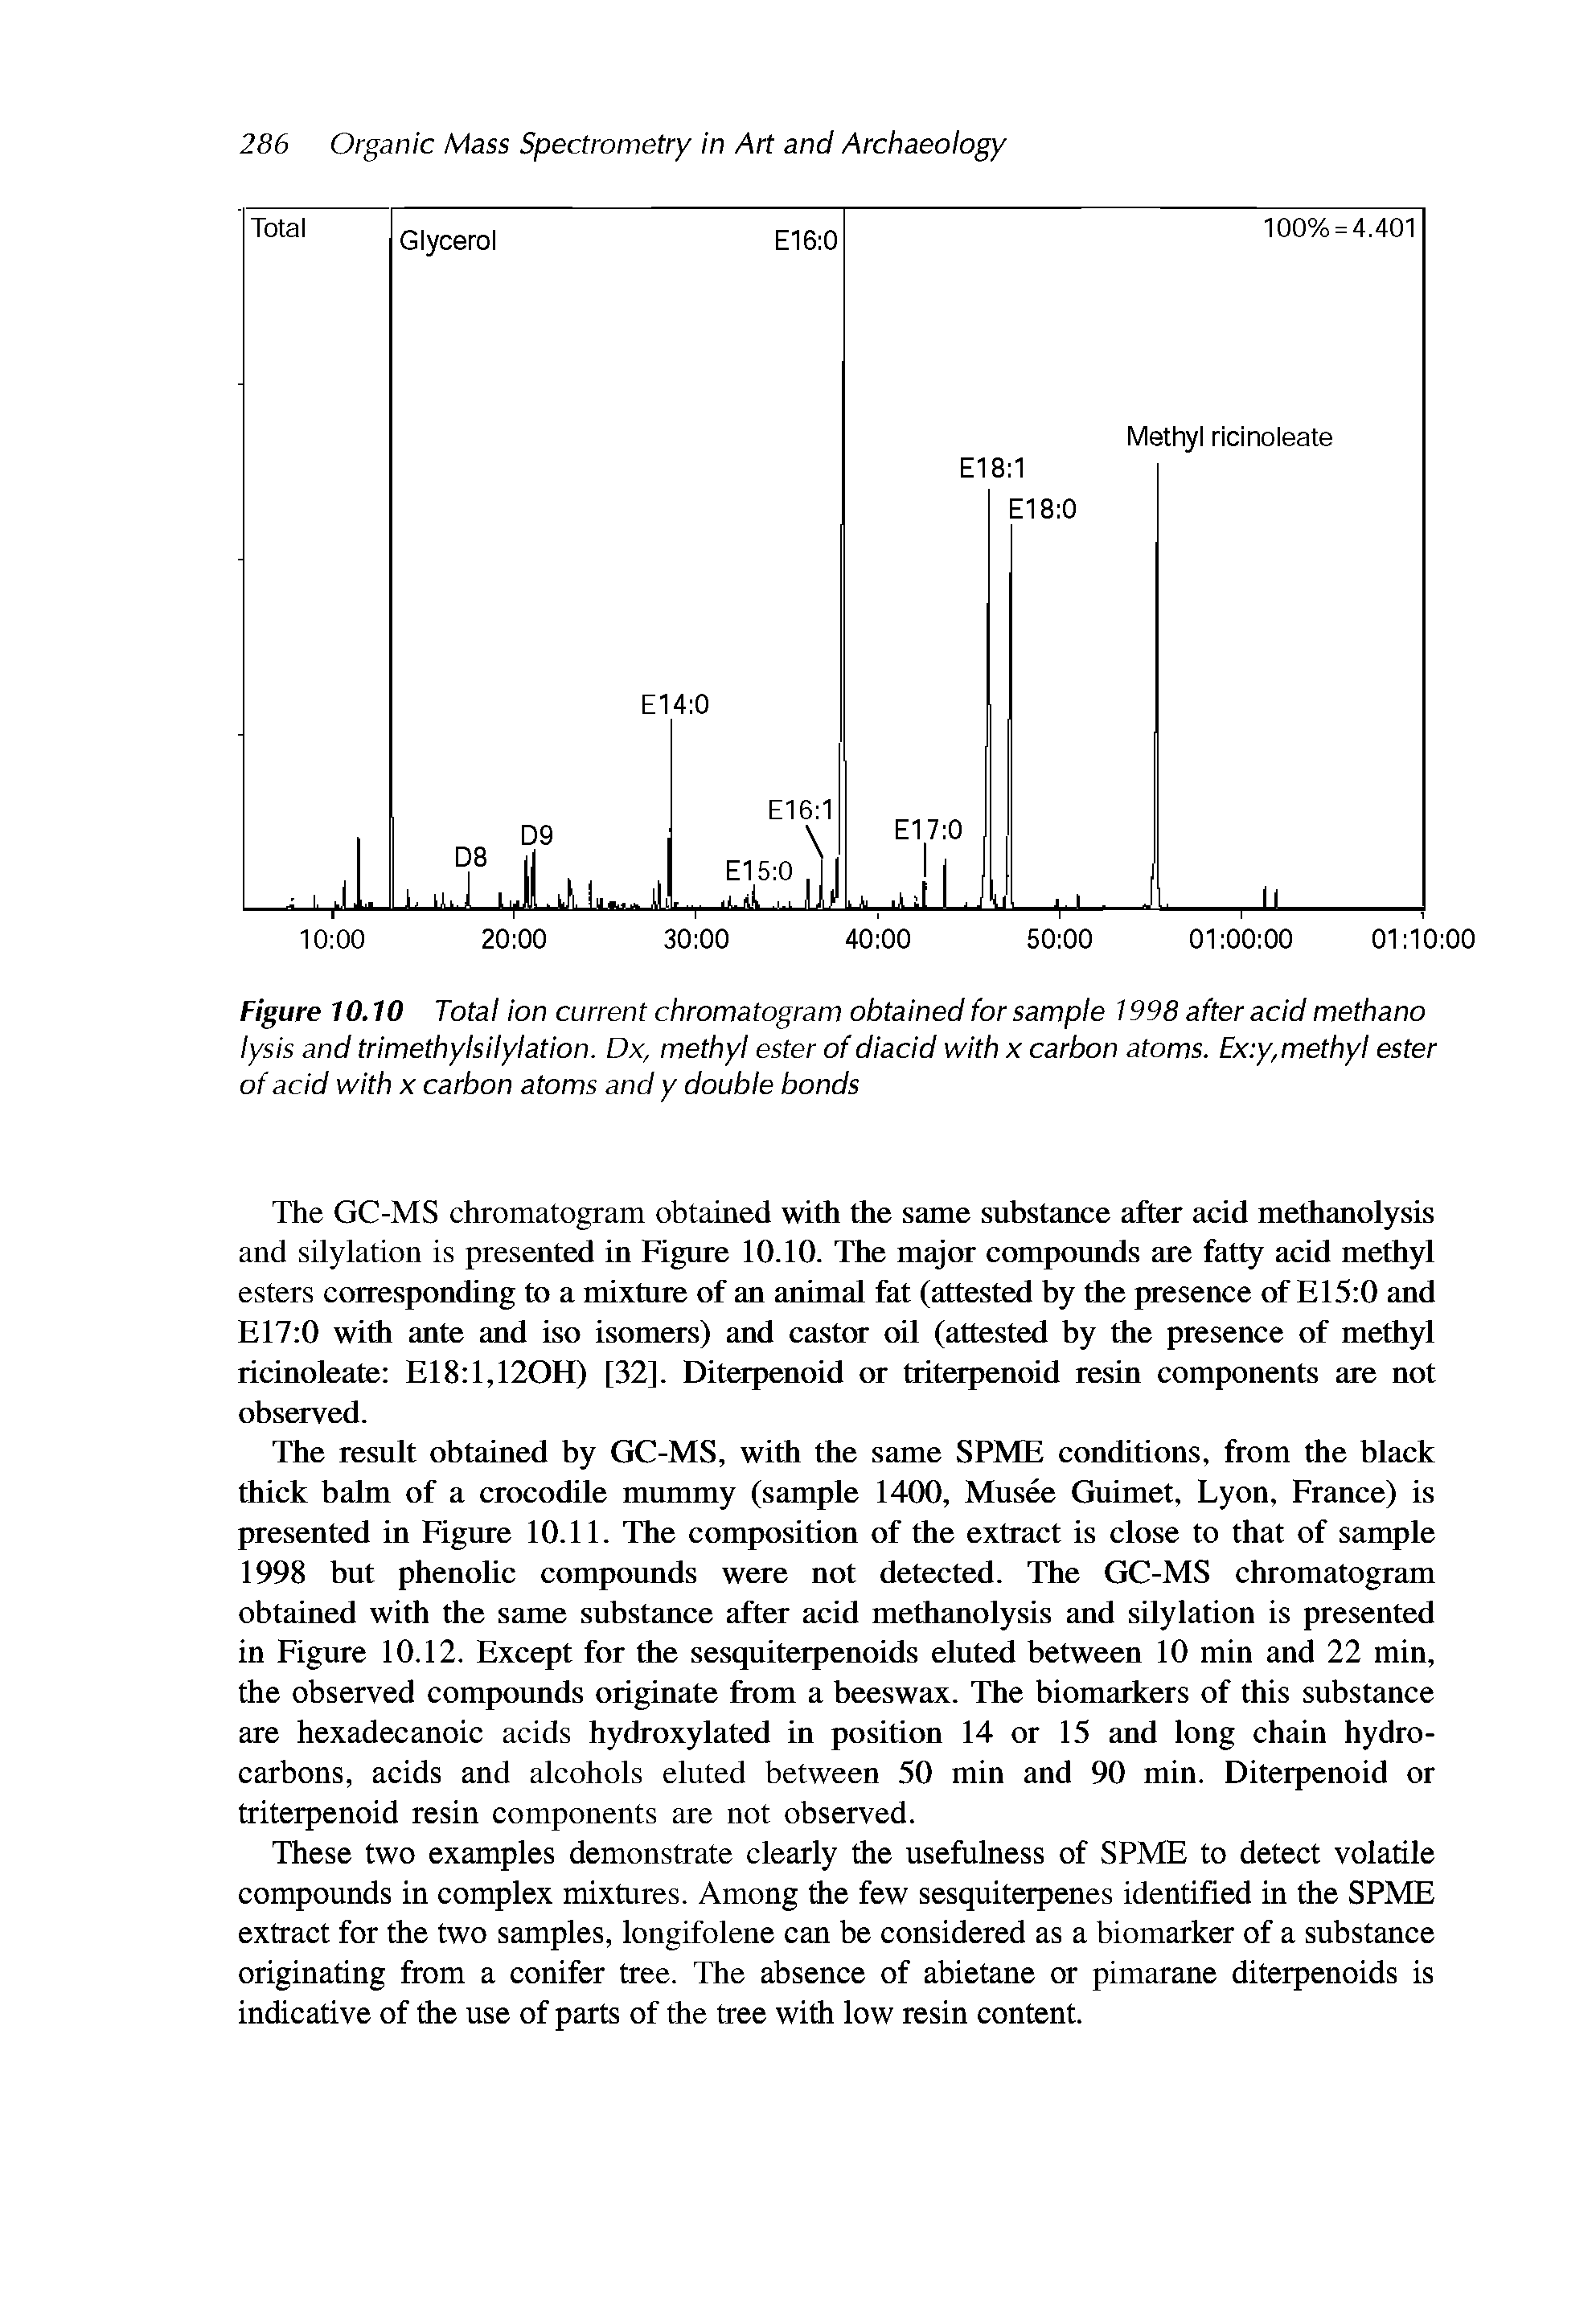 Figure 10.10 Total ion current chromatogram obtained for sample 1998 after acid methano lysis and trimethylsilylation. Dx, methyl ester of diacid with x carbon atoms. Ex y, methyl ester of acid with x carbon atoms and y double bonds...